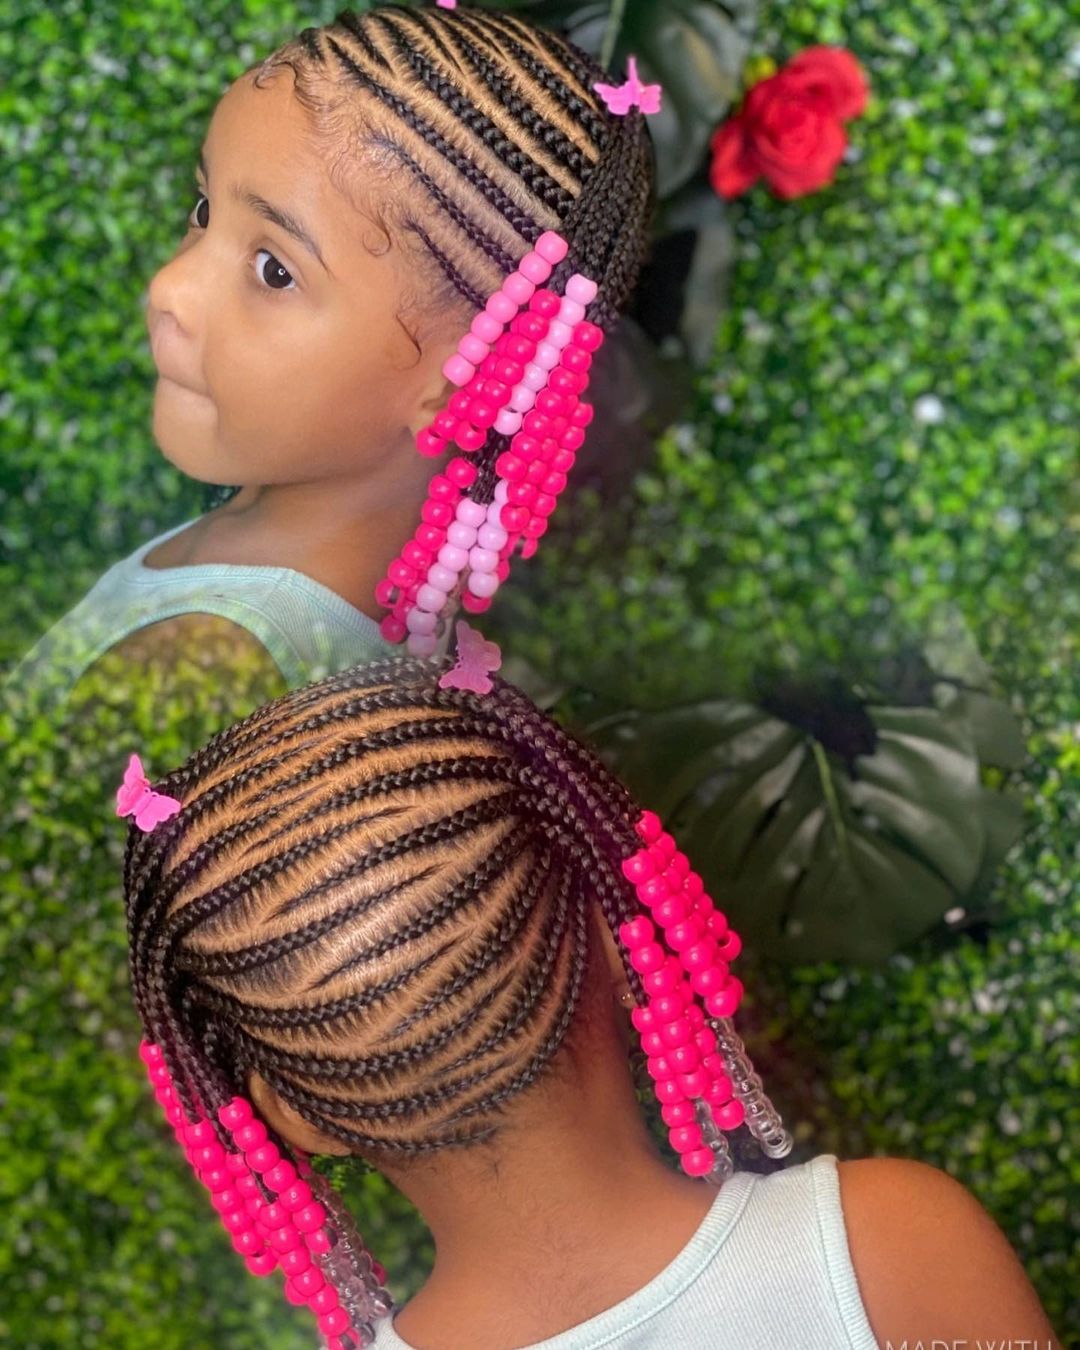 16. Flat Patterned Tribal Braids with Beads